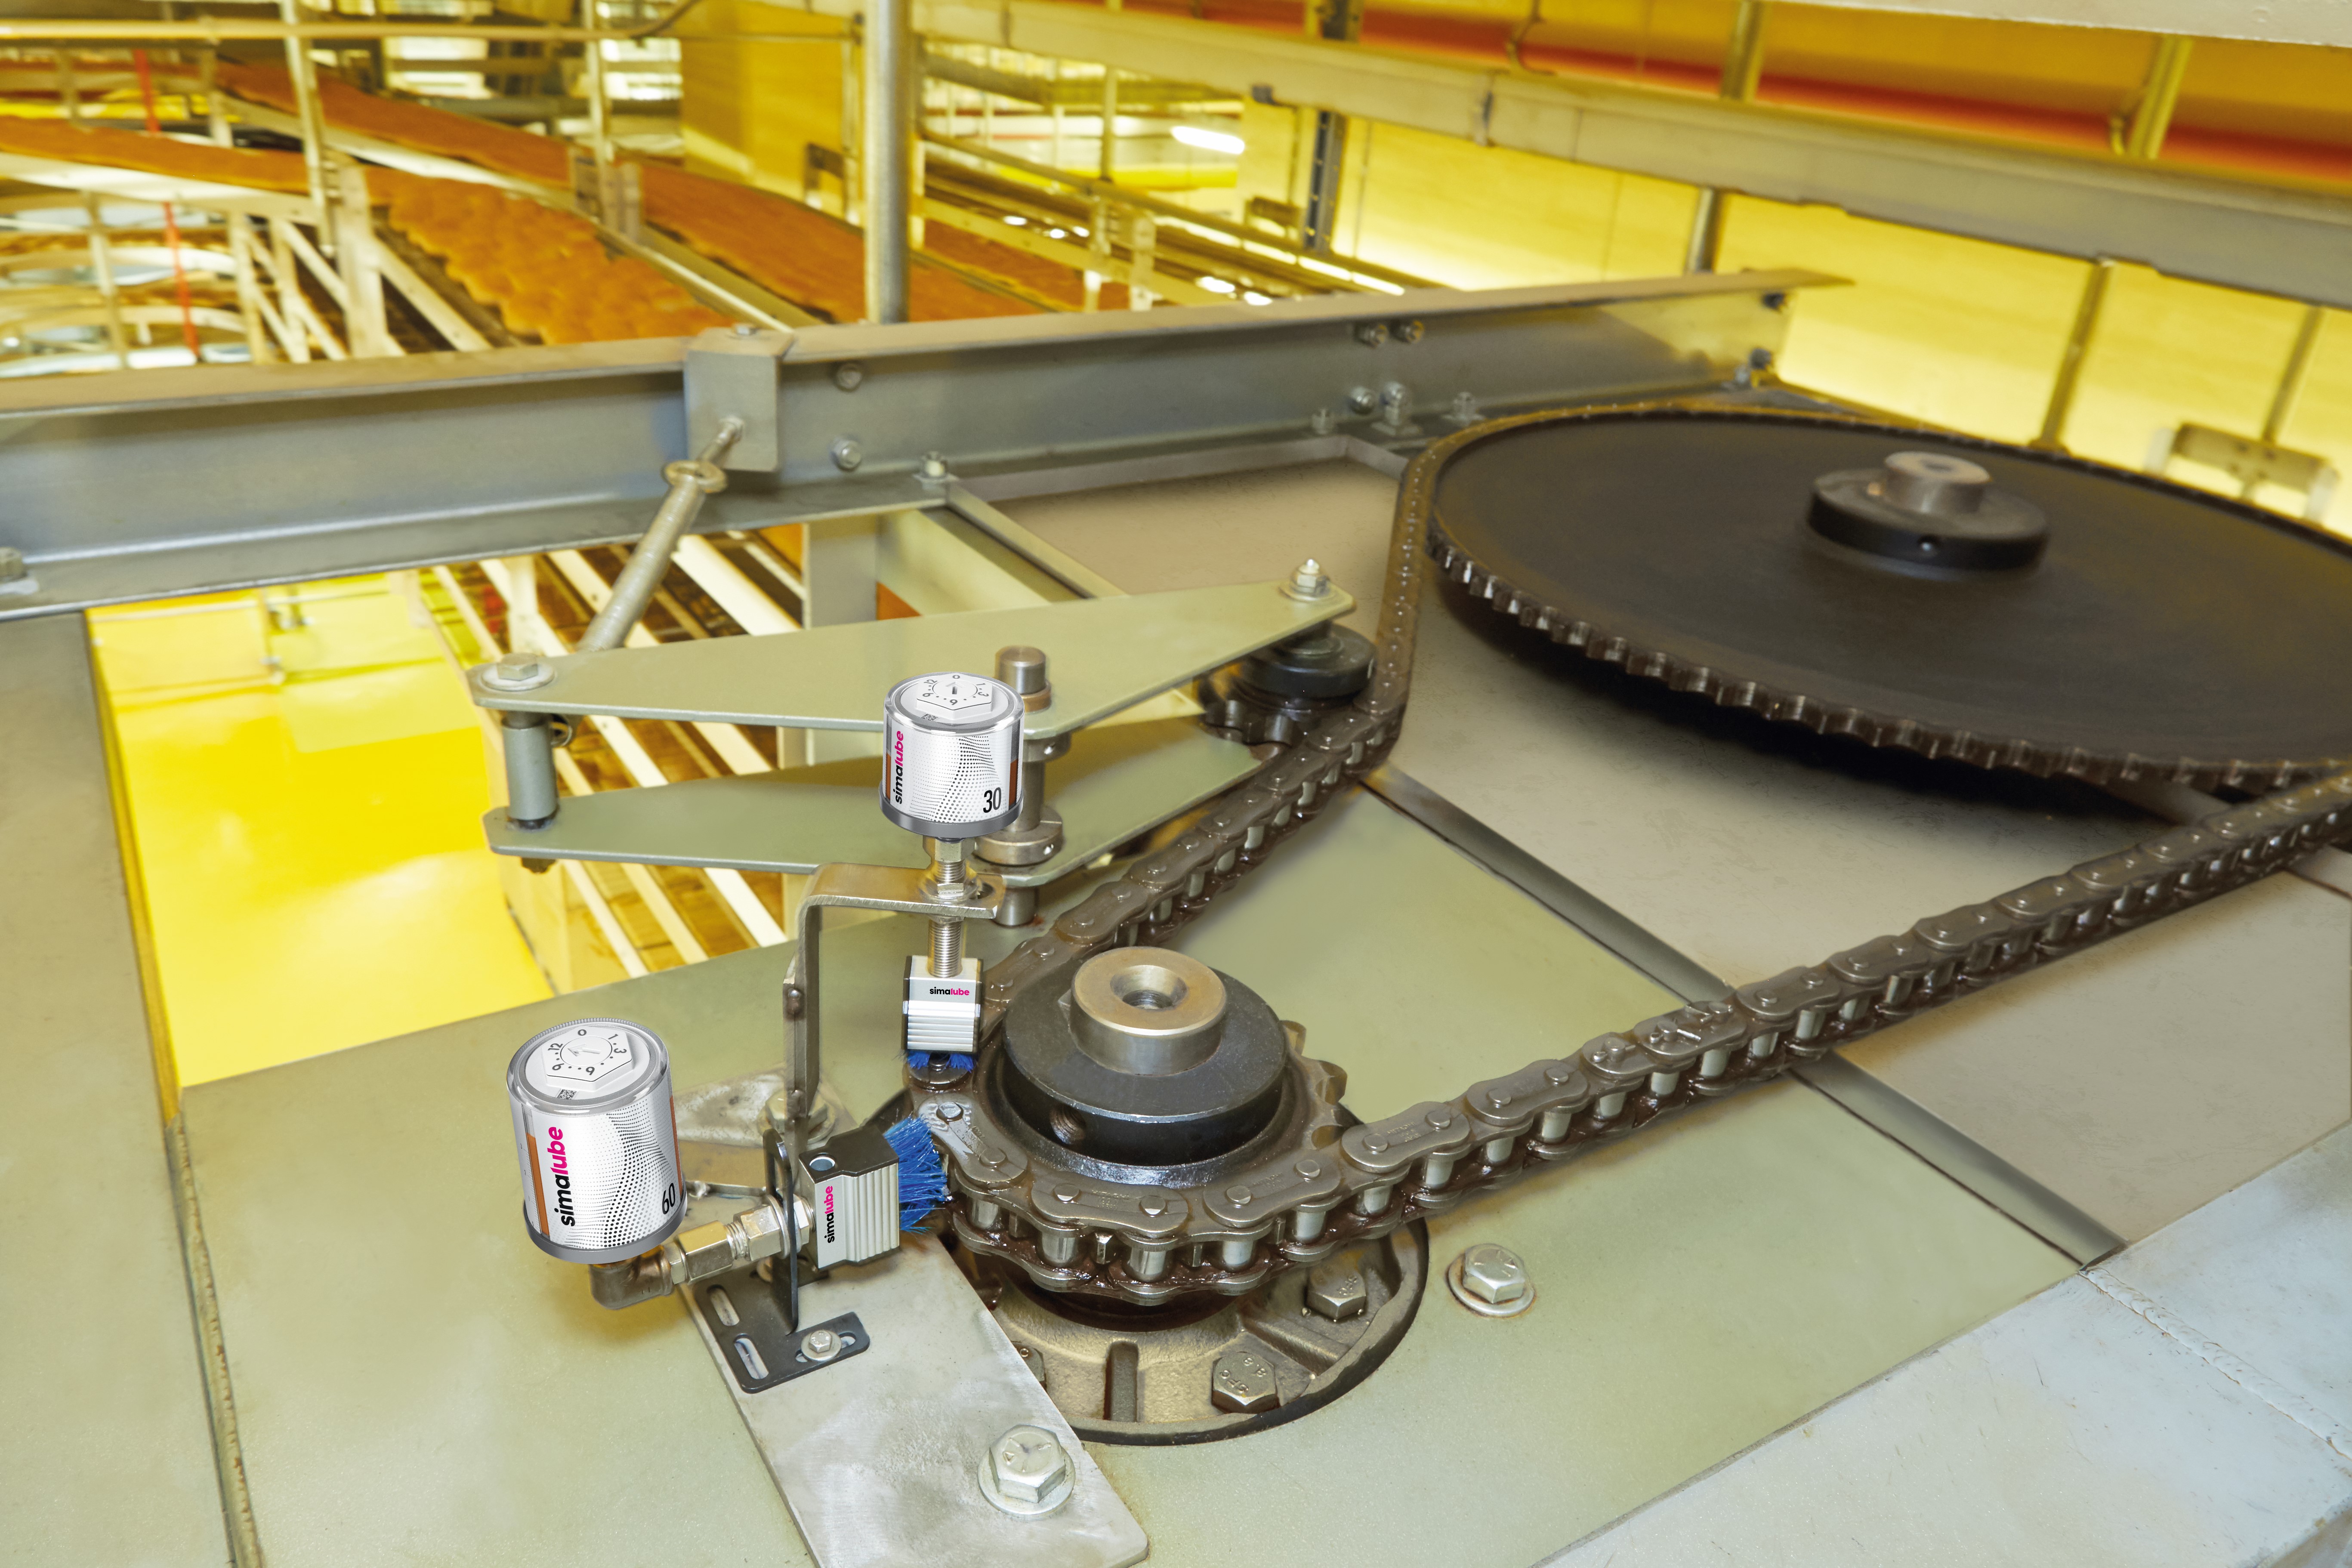 simalube attached with brush to lubricate and clean the conveyor belts and chains while lubricating it.